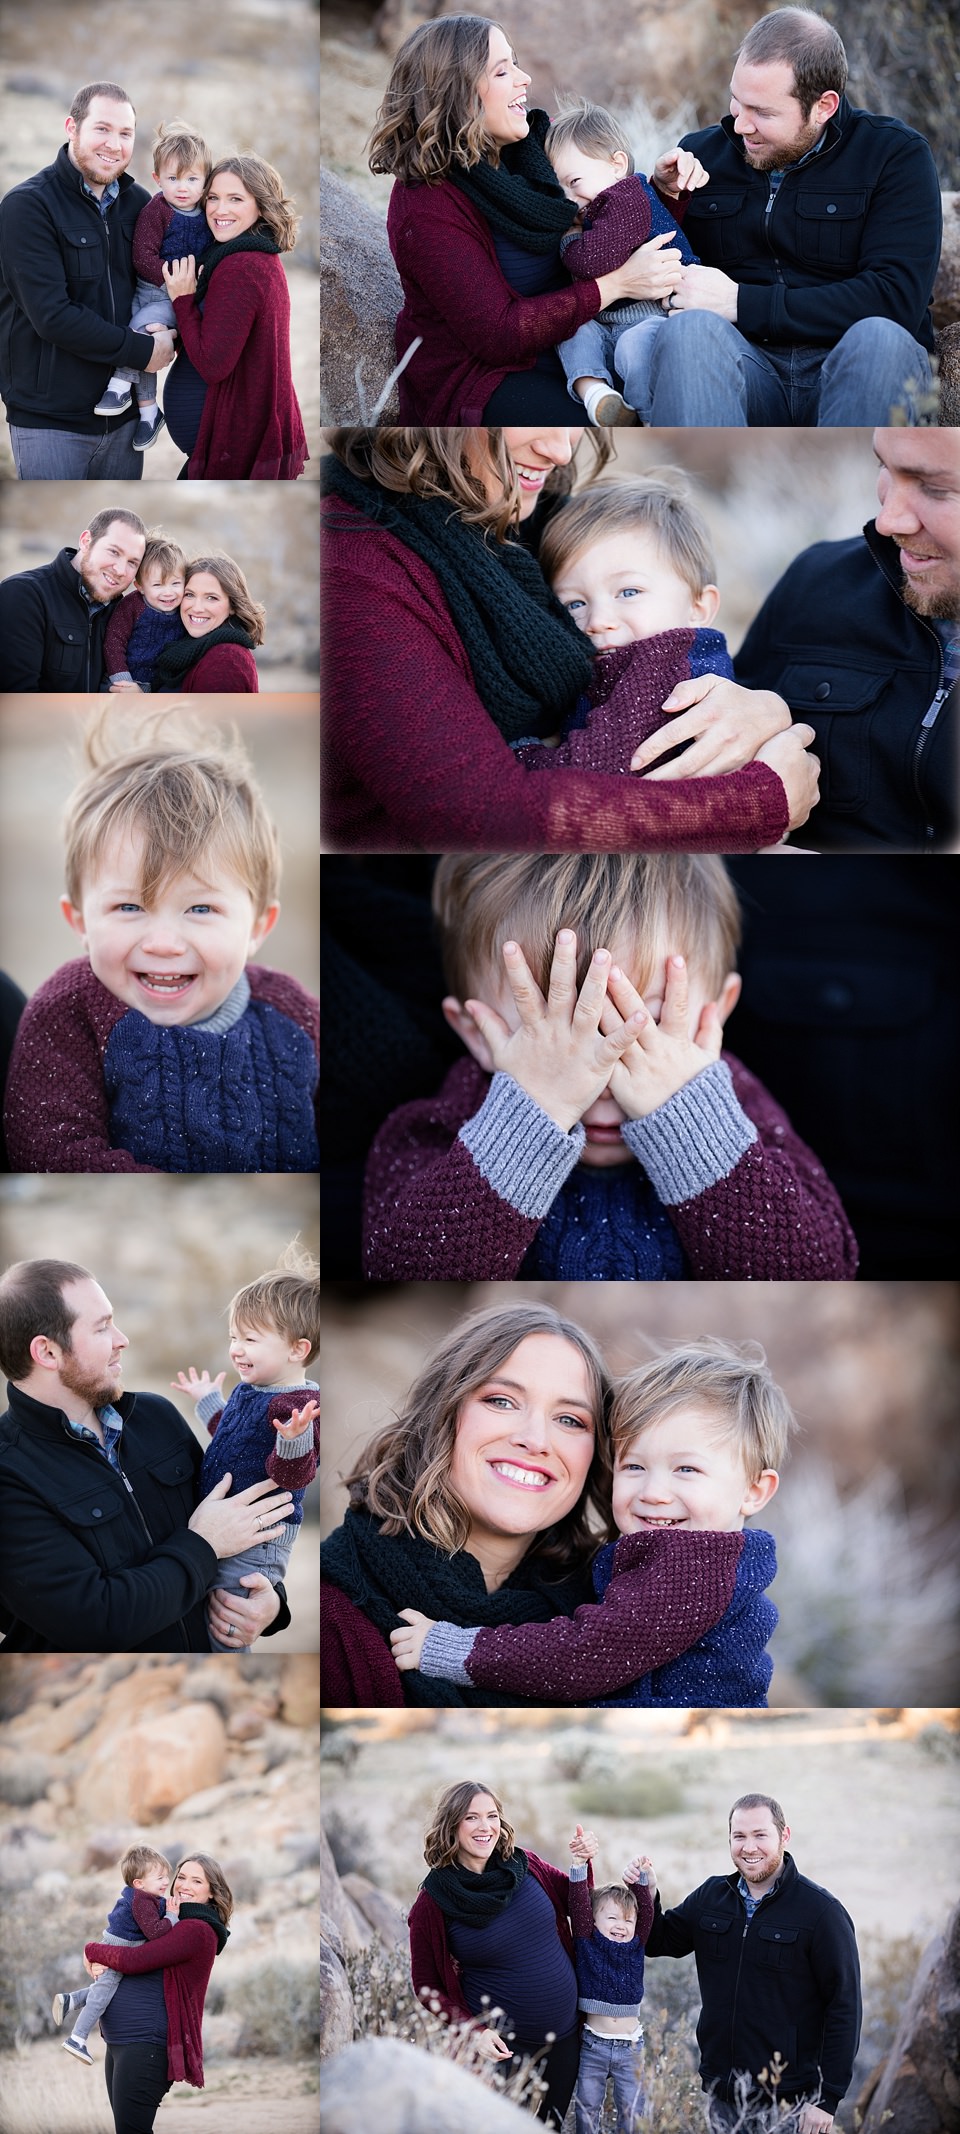 Best family photography poses! Great Family posing ideas for families with toddlers. Love these ideas for bringing out playful, natural connections with great expressions! 